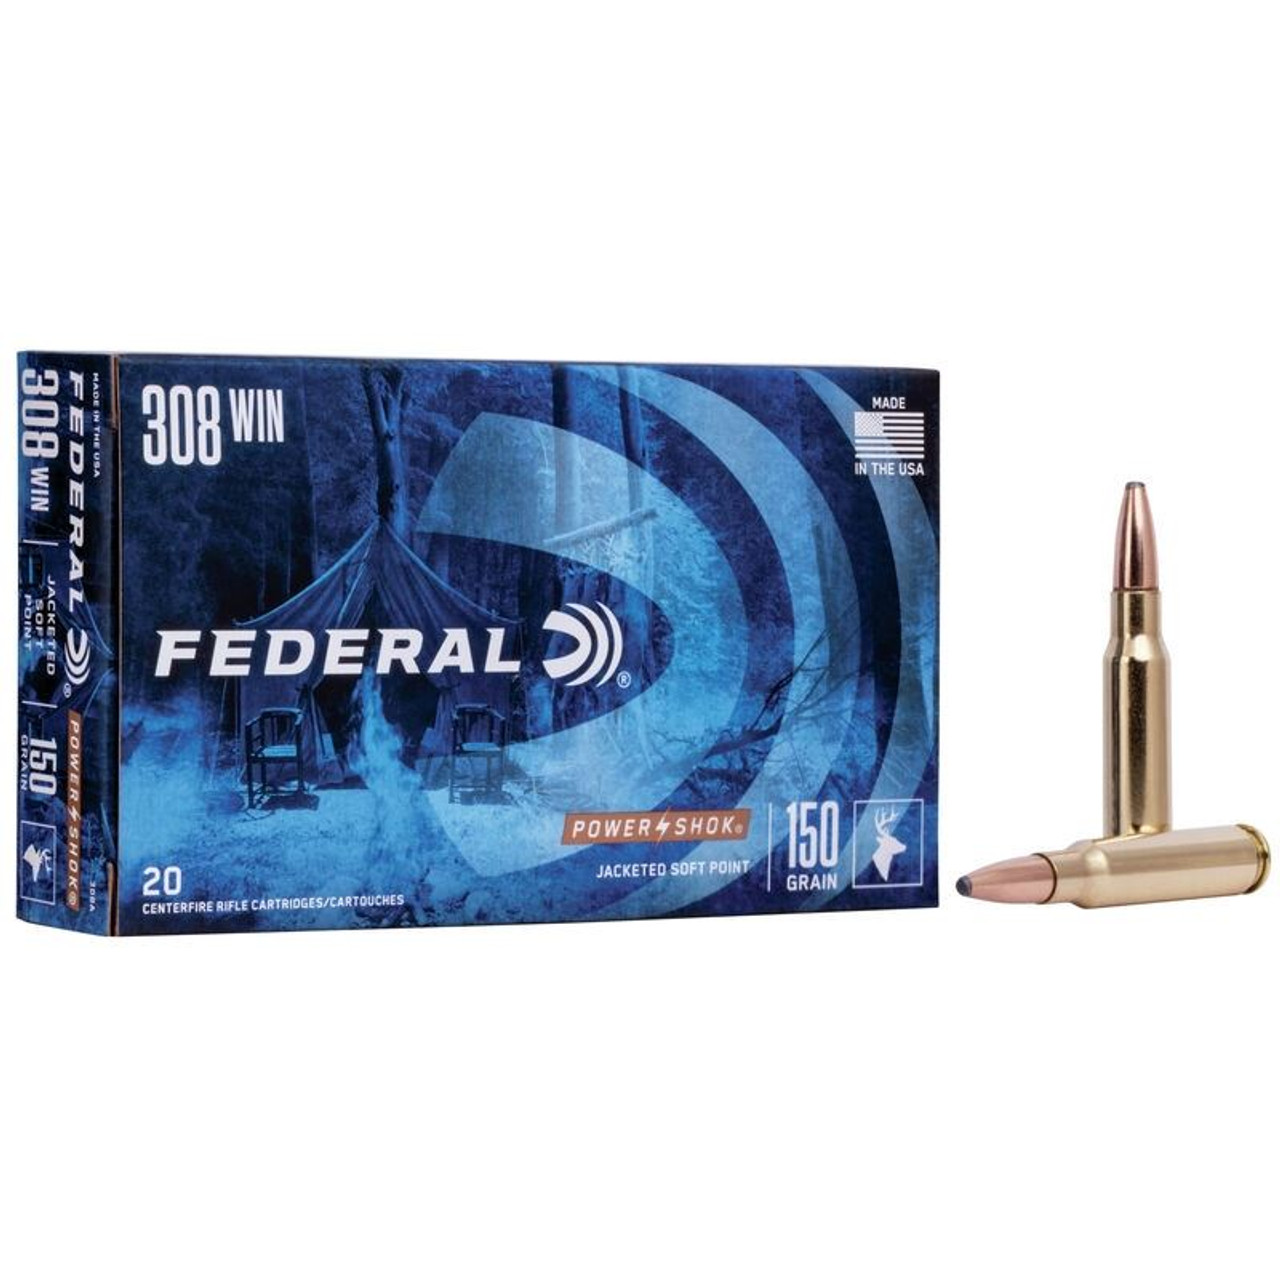 Federal Power Shok .308 WIN 150g Sp 20 Rounds